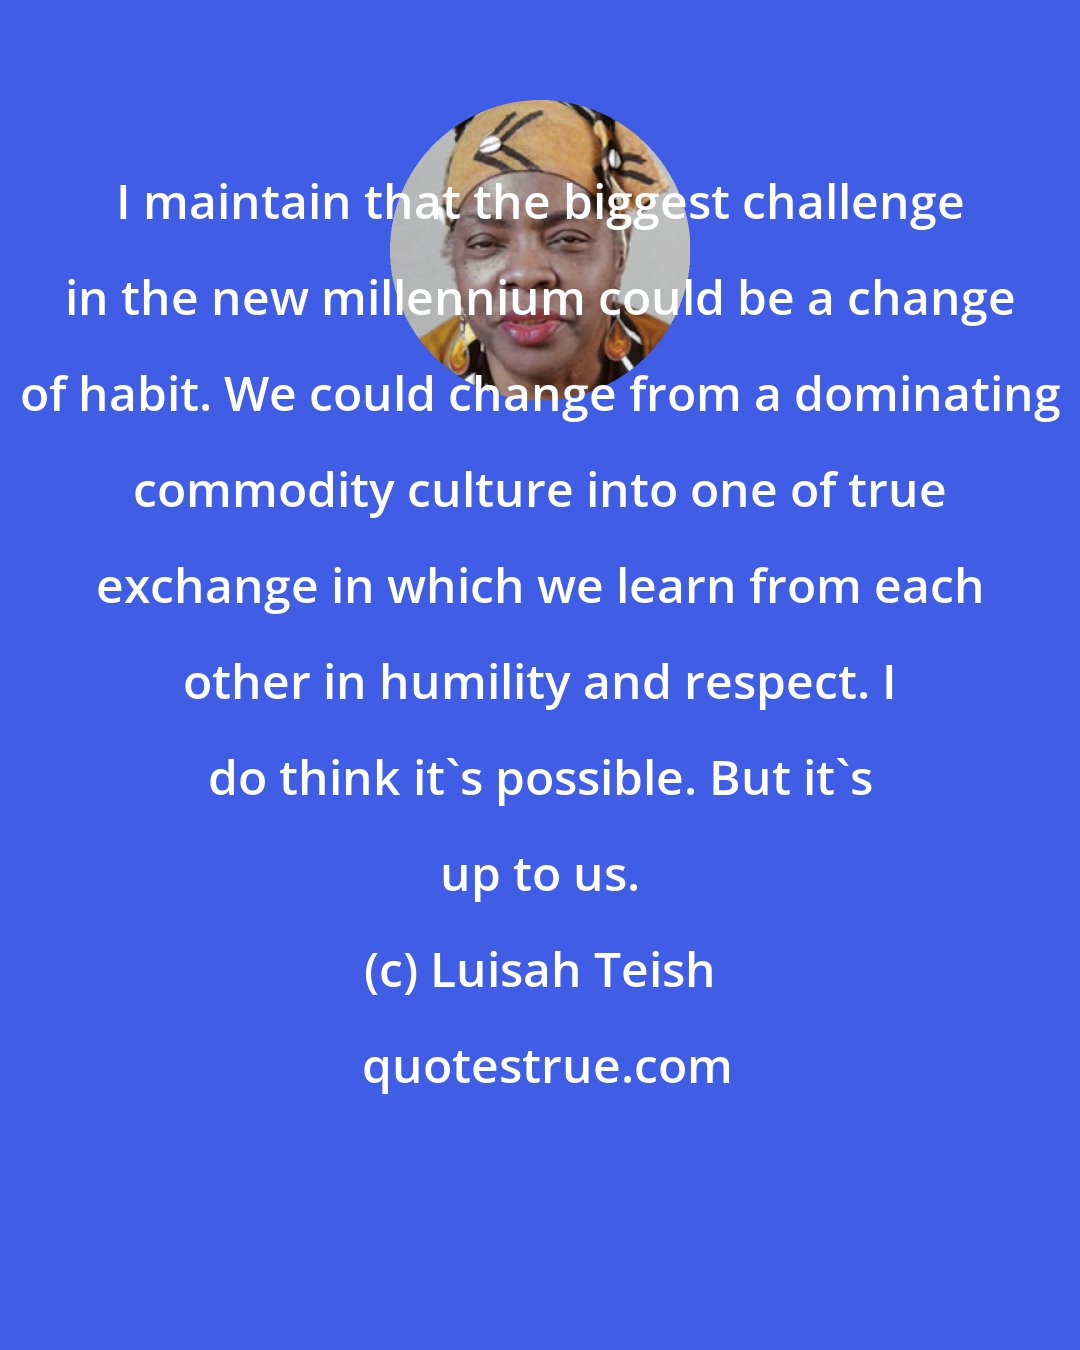 Luisah Teish: I maintain that the biggest challenge in the new millennium could be a change of habit. We could change from a dominating commodity culture into one of true exchange in which we learn from each other in humility and respect. I do think it's possible. But it's up to us.